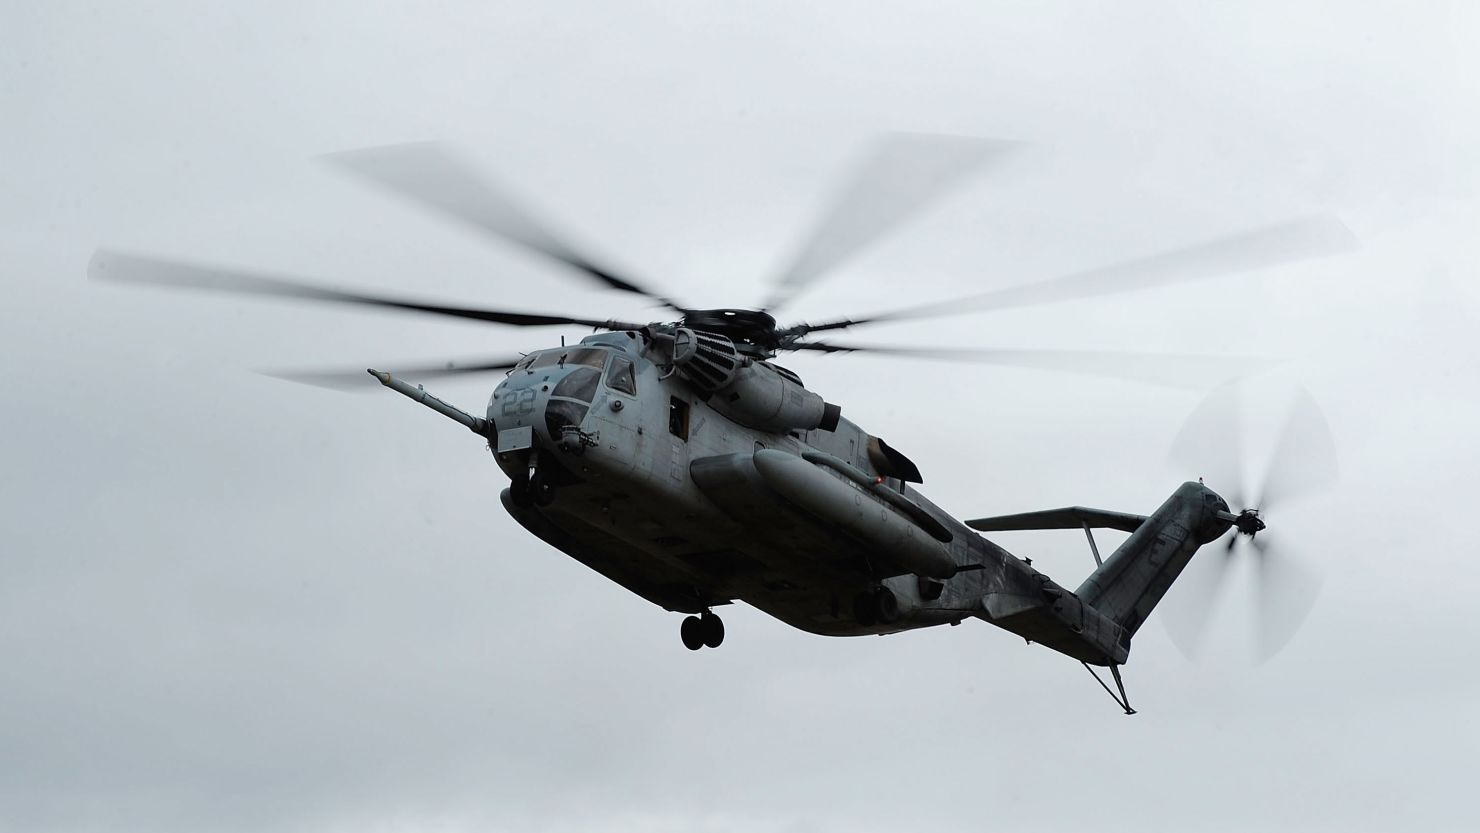 A CH-53E helicopter similar to the one involved in Wednesday's accident.